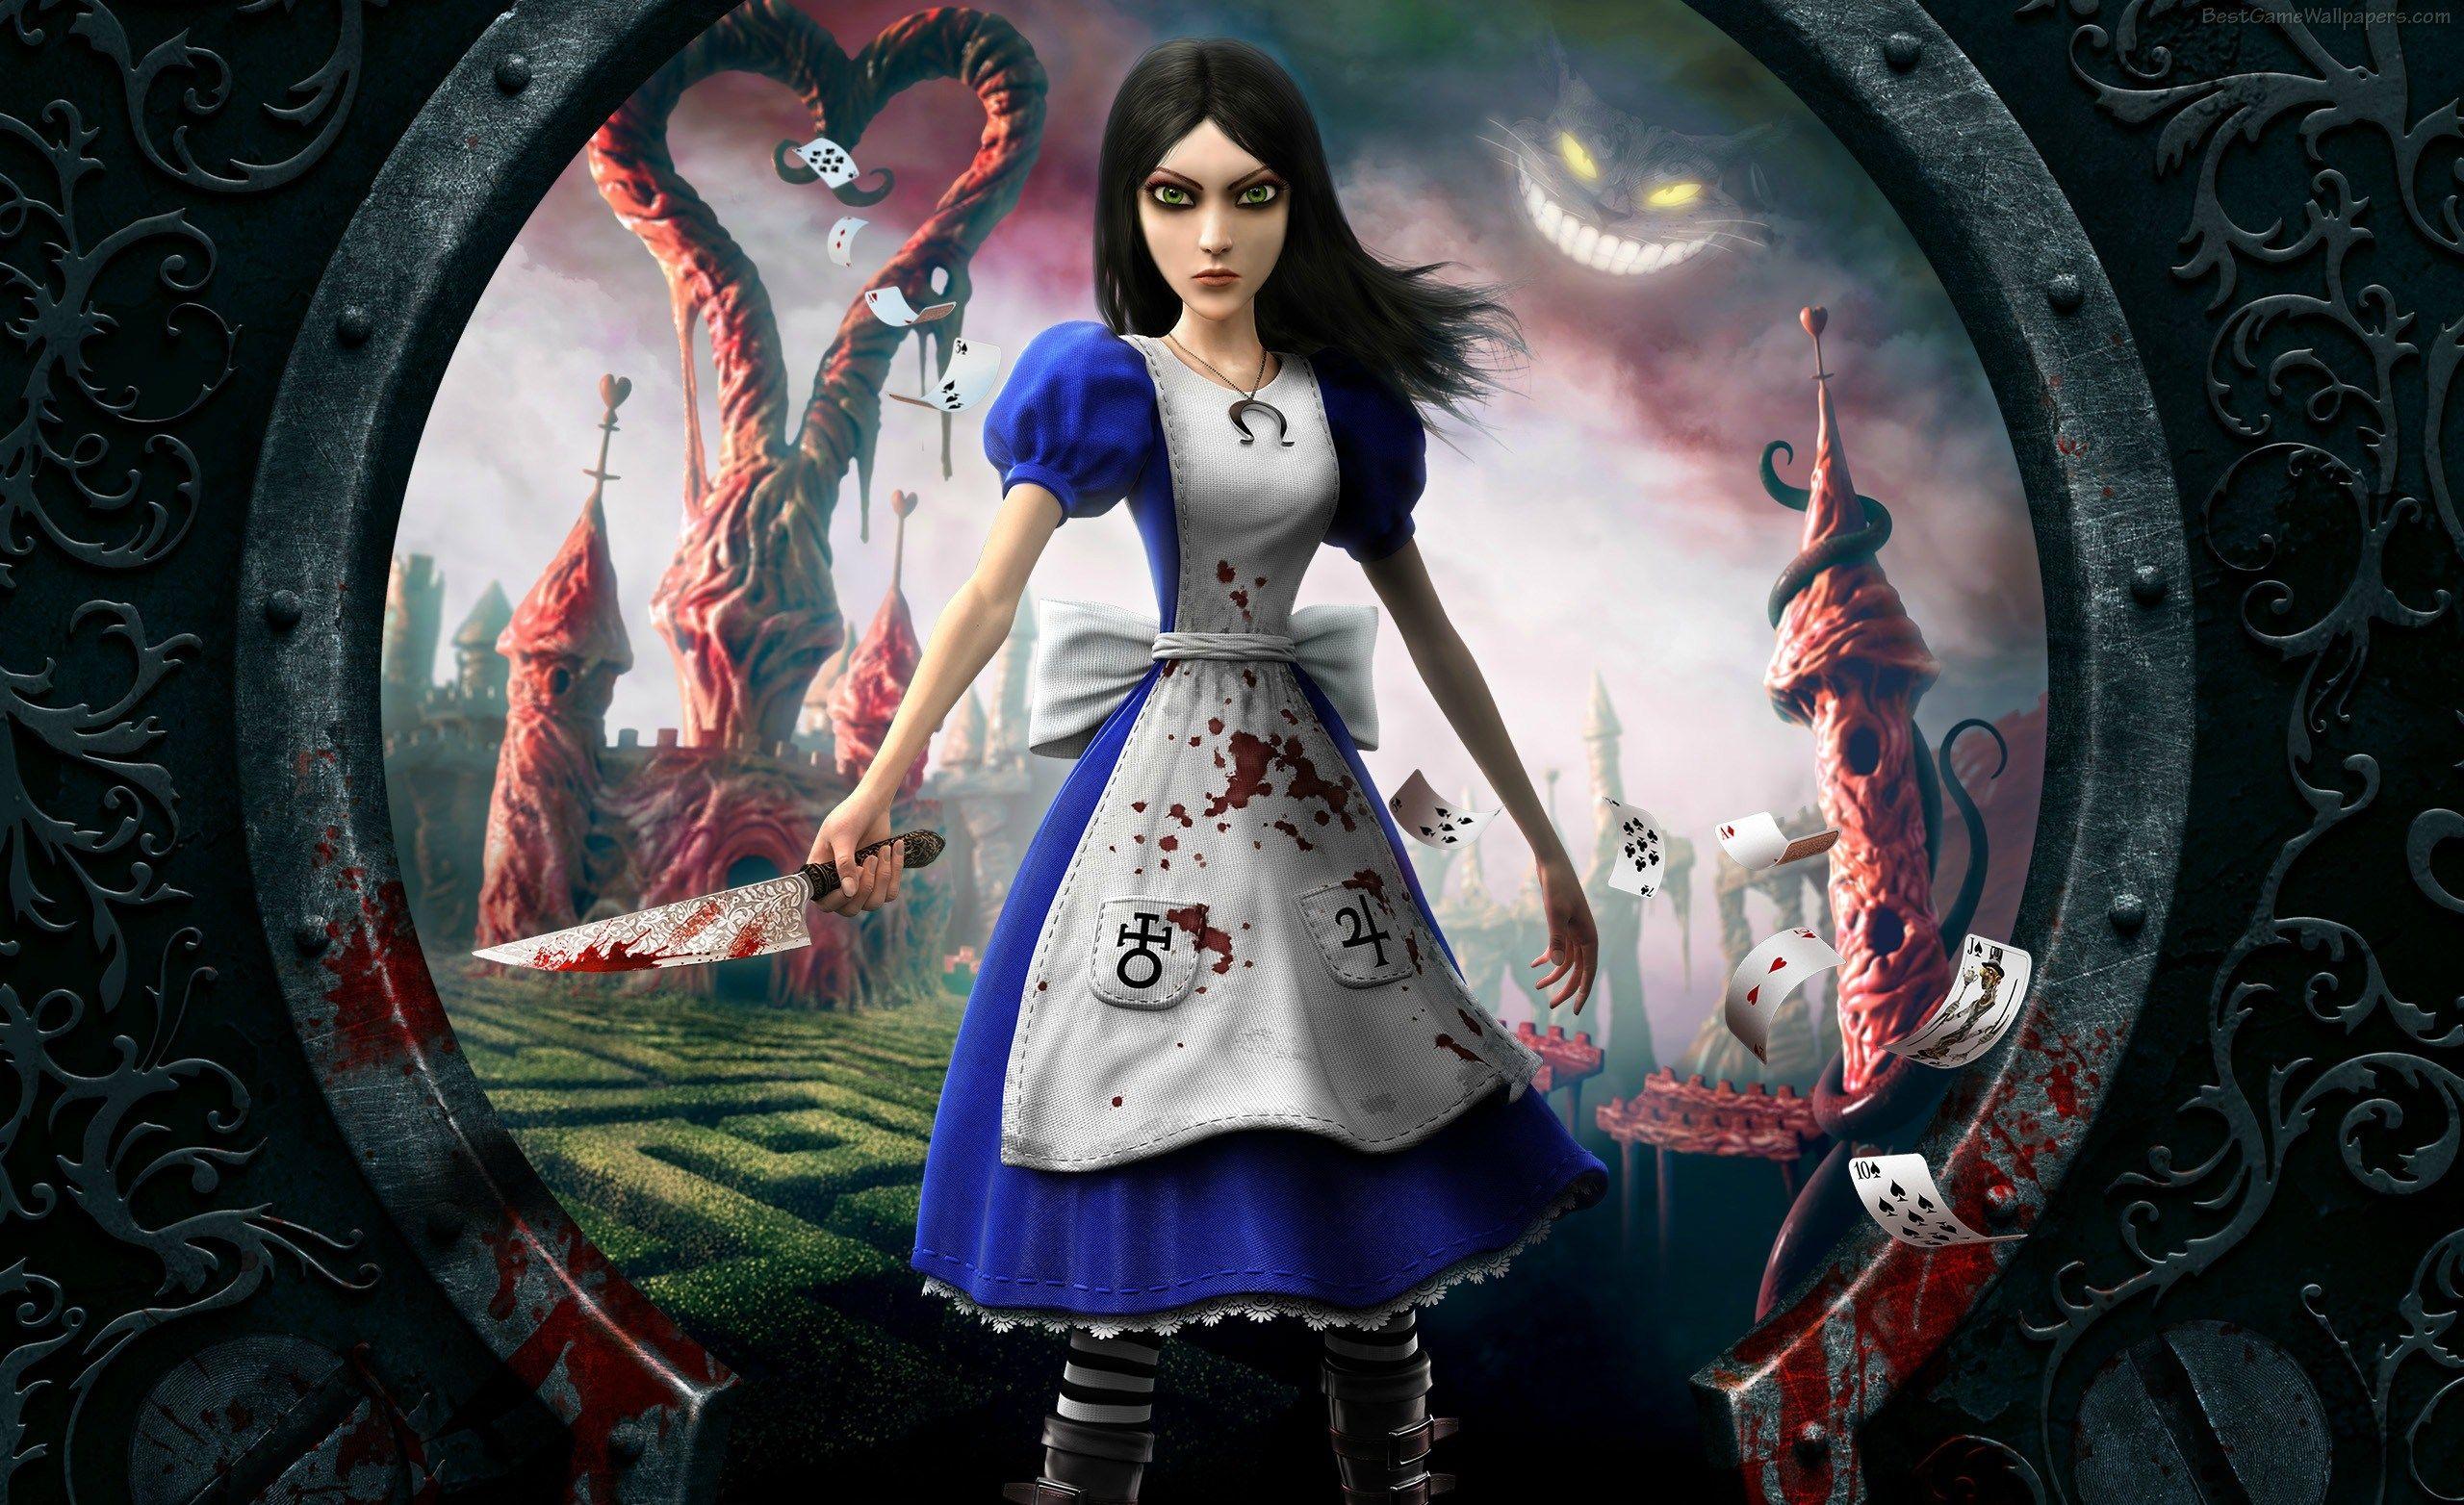 Wallpaper Image Alice Madness Returns By Holmes Bush 2017 03 28